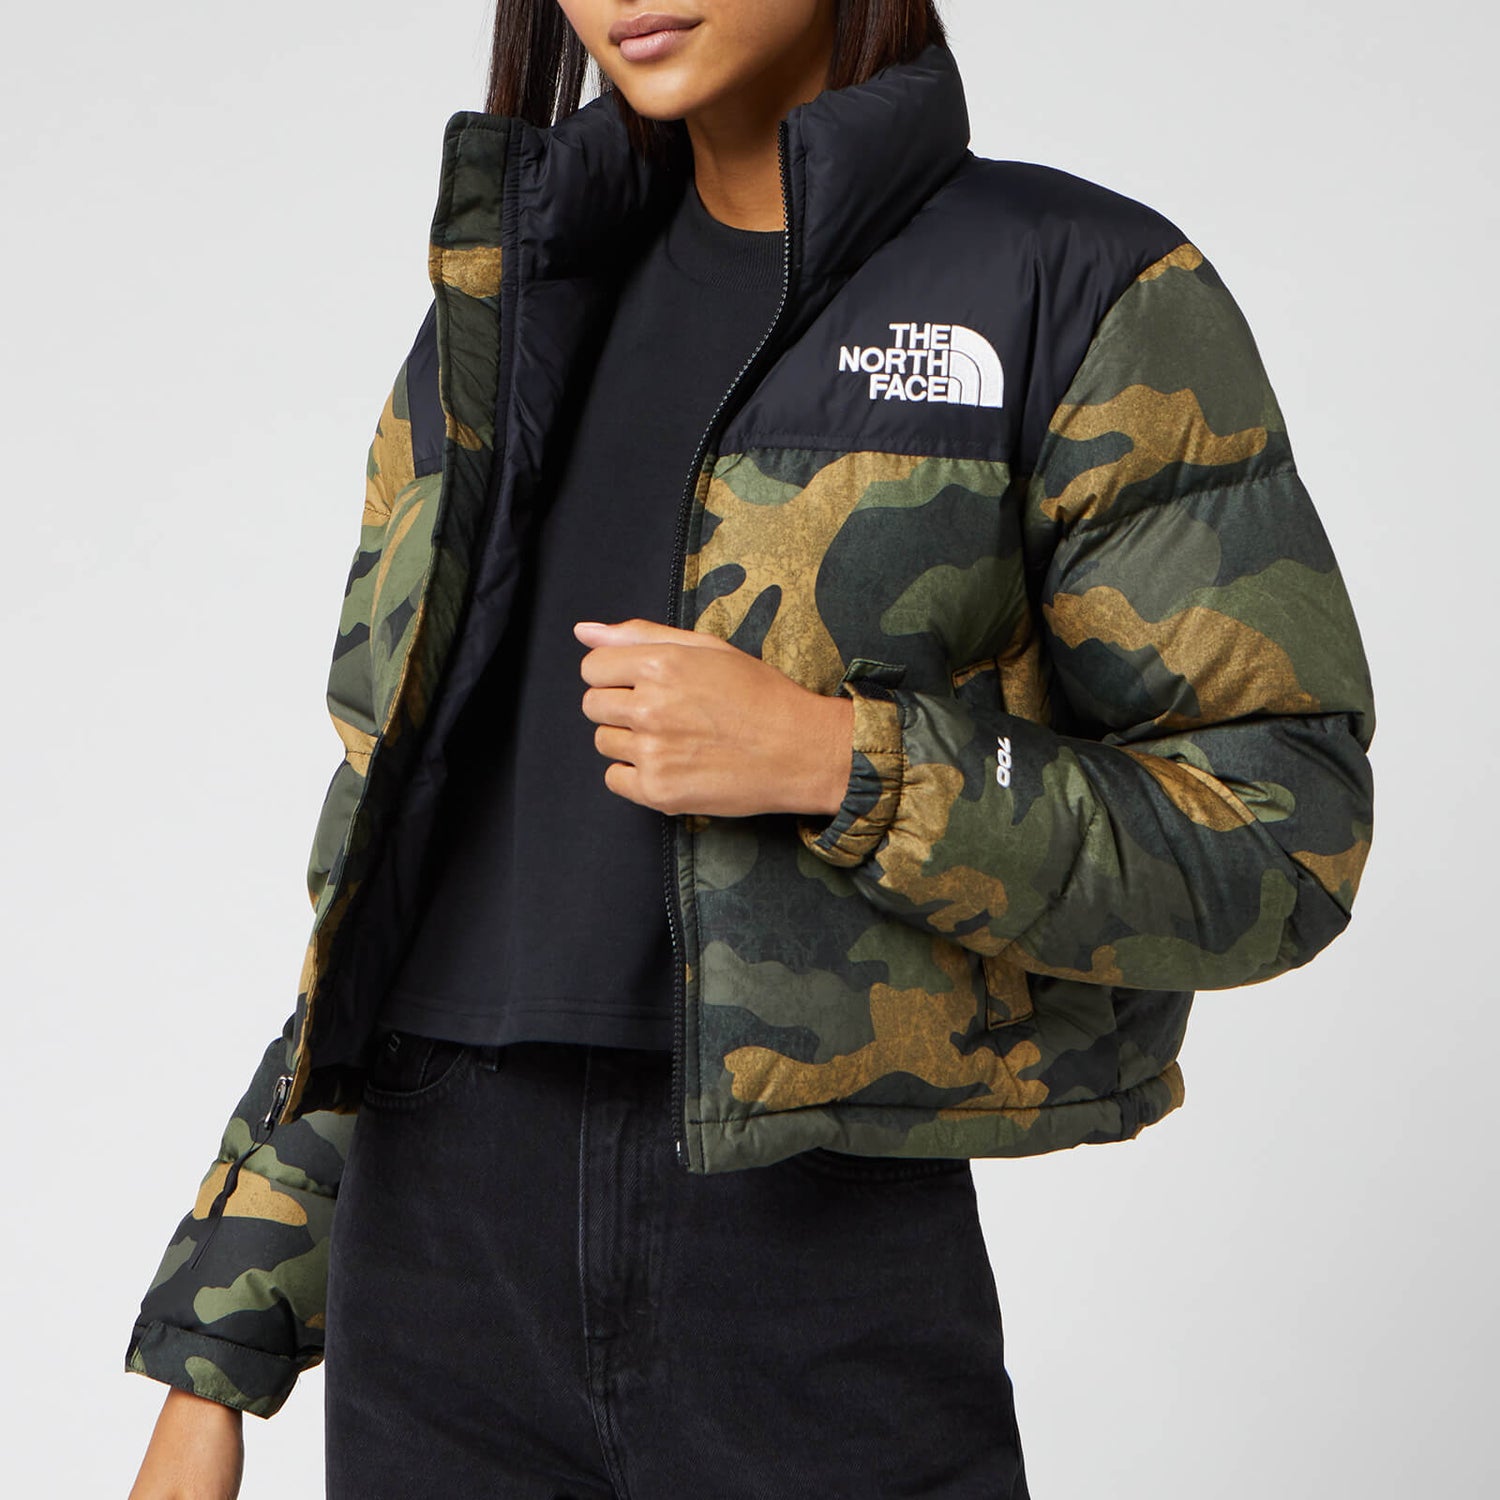 The North Face Women's Nuptse Crop Jacket - Burnt Olive Green